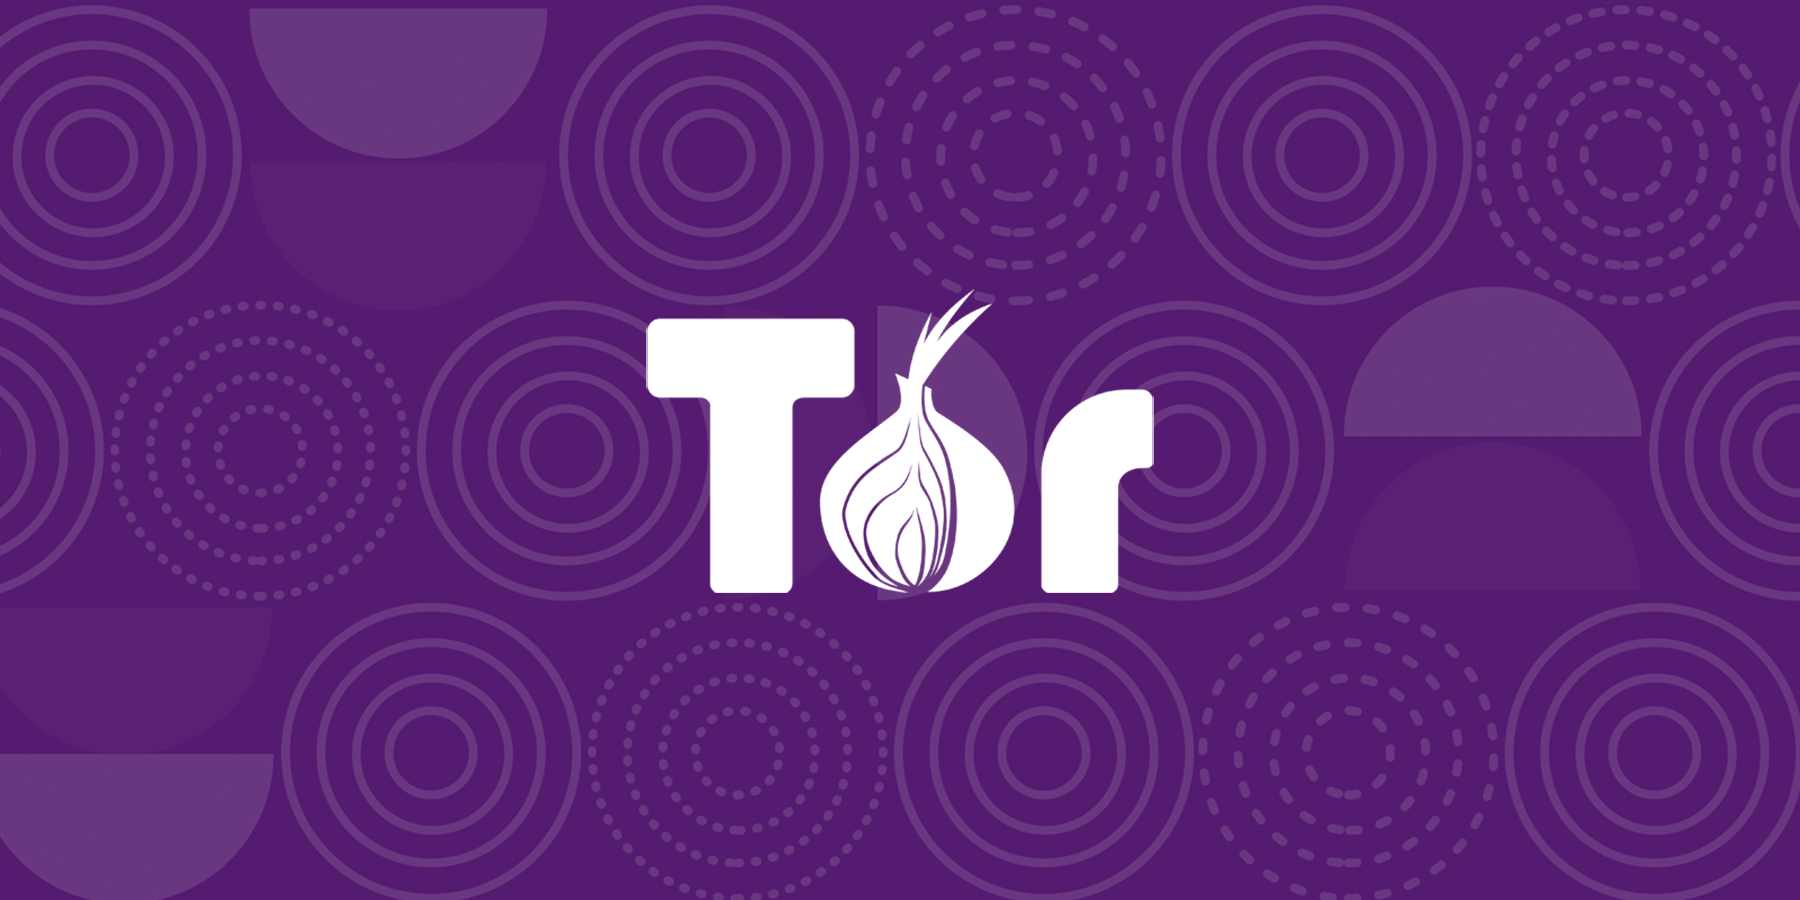 The Tor Project | Privacy & Freedom Online